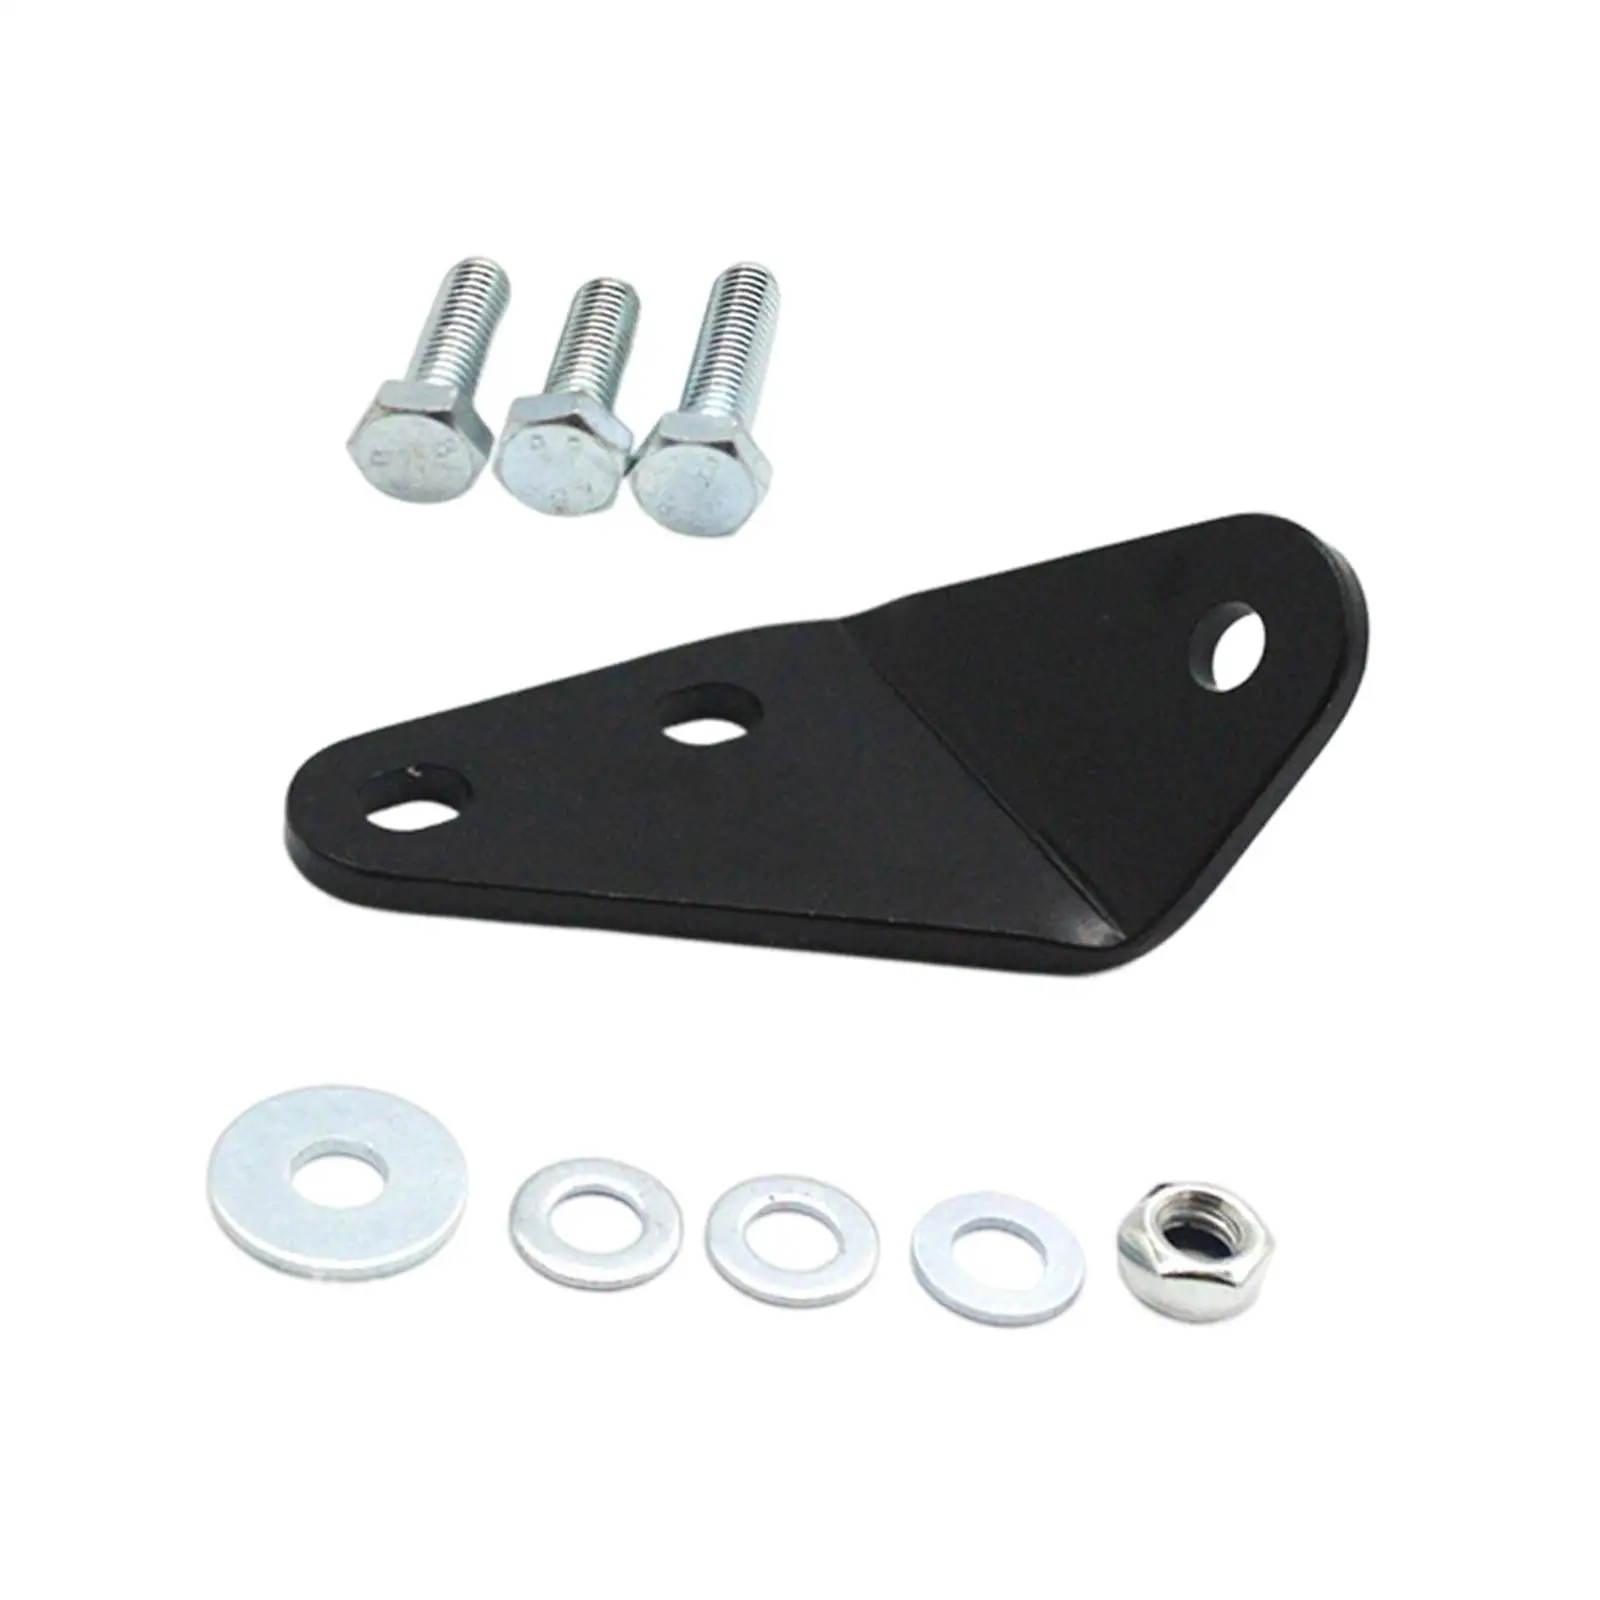 Clutch Pedal Bracket Metal Directly Replace High Performance for Volkswagen T4 Transporter Multivan Caravelle Accessories